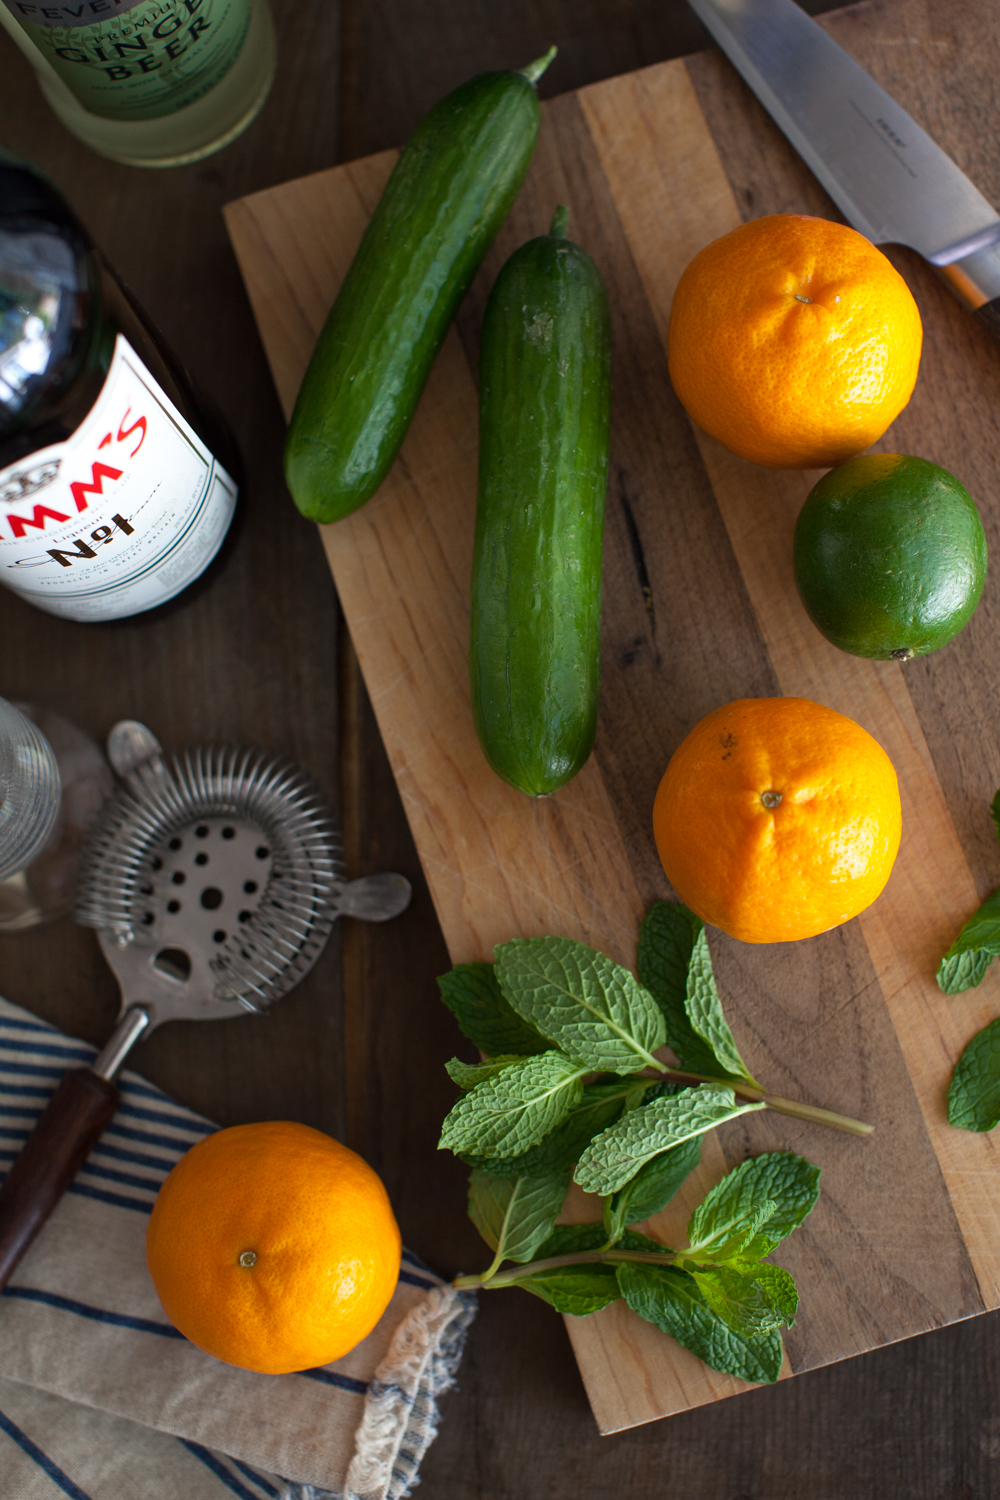 The Pixie Pimm's Cup starts with a simple blend of fresh cucumber, mint and of course Ojai Pixie Tangerines